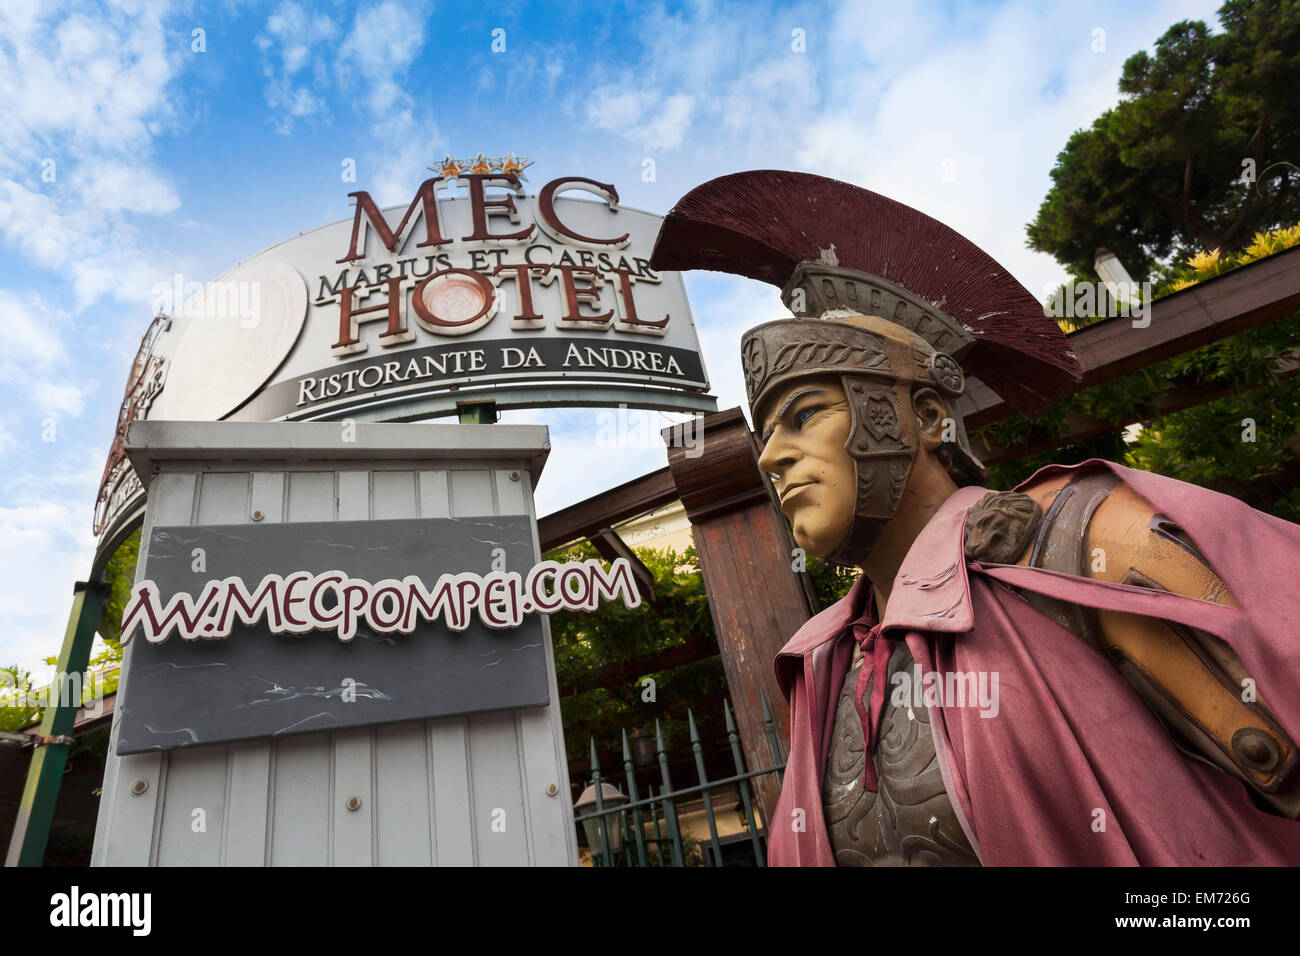 Hotel and statue of soldier; Pompei, Italy Stock Photo